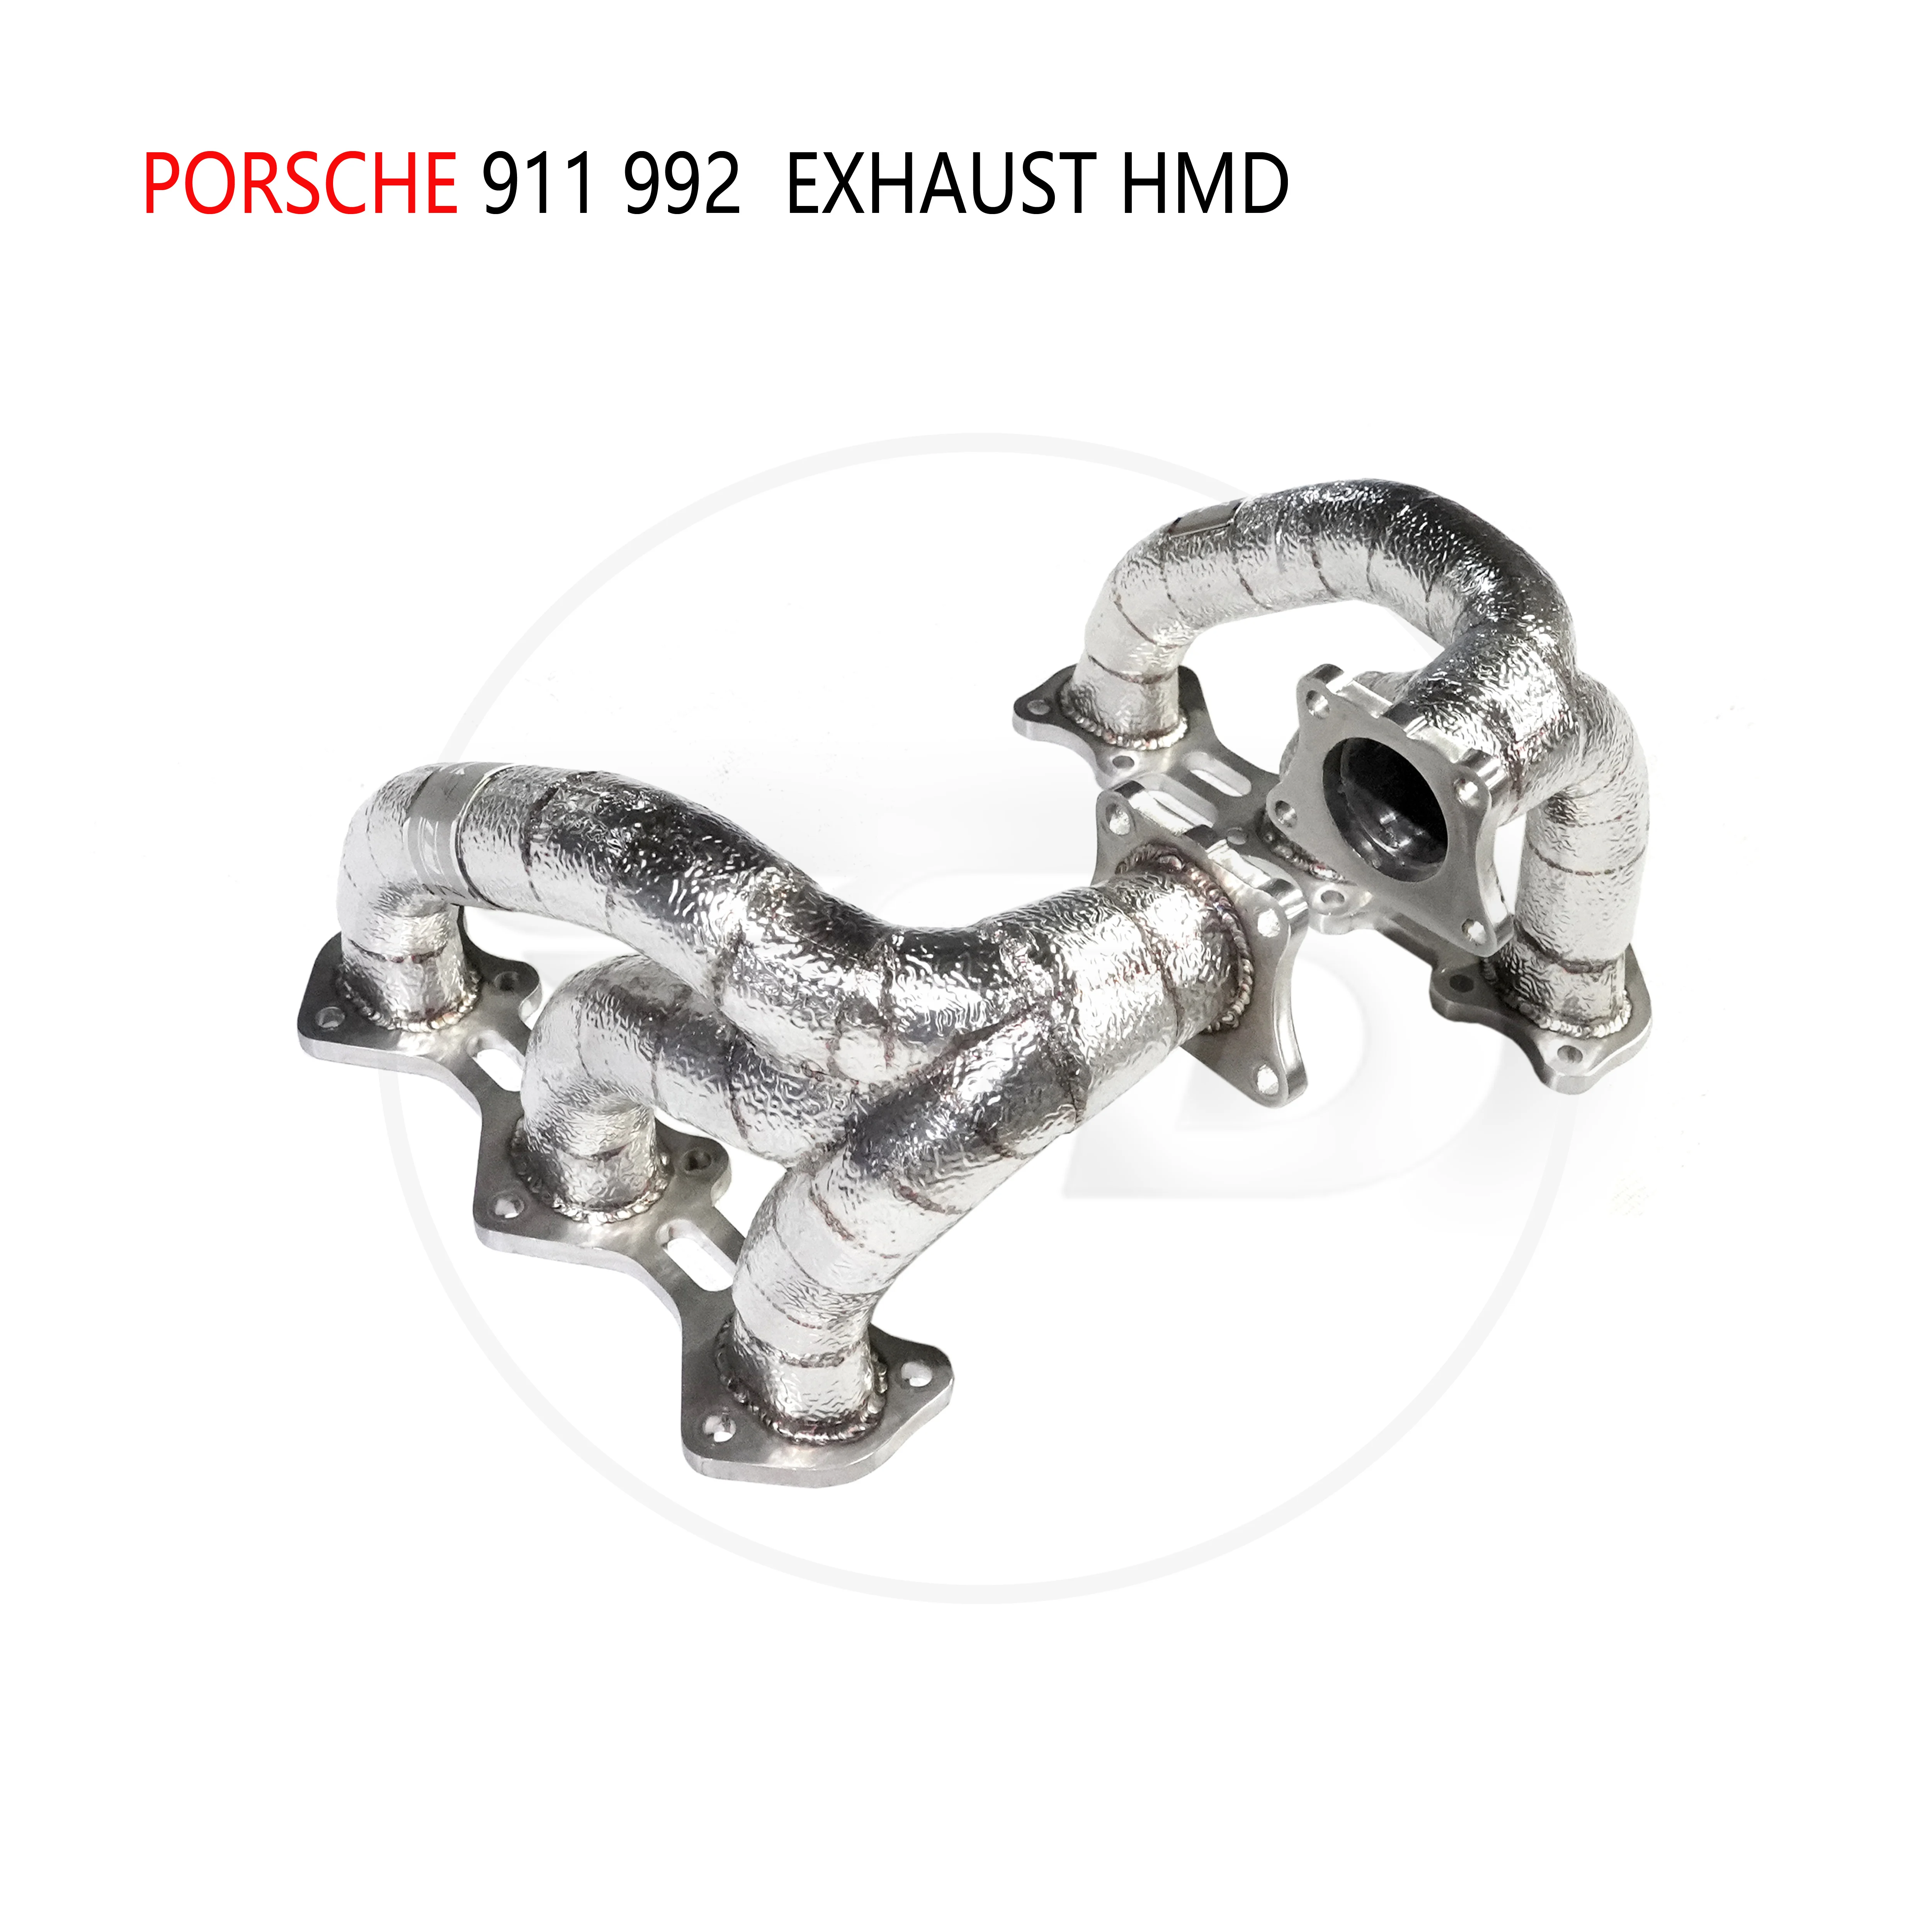 

HMD Exhaust Manifold High Flow Downpipe for Porsche 911 992 Car Accessories With Catalytic Converter Header Catless Pipe